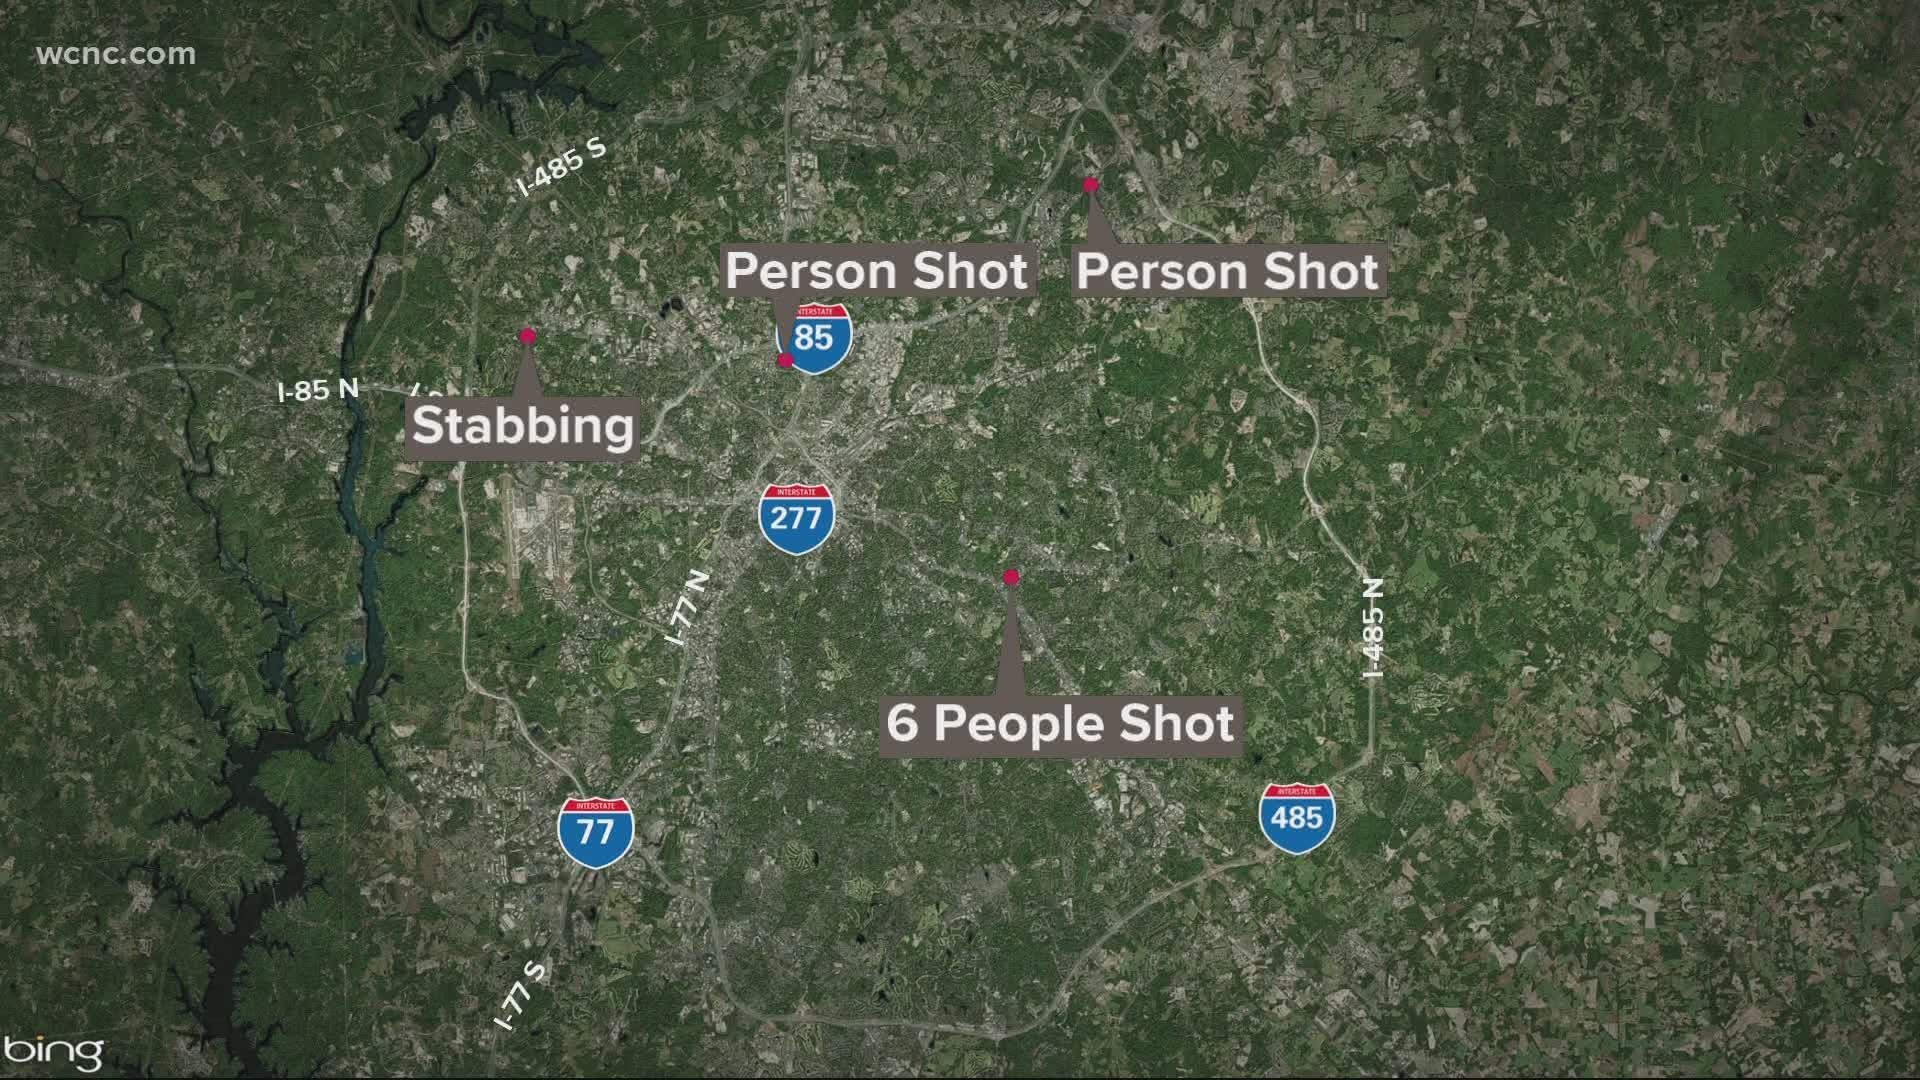 Police said four shootings an a stabbing occurred within just over a two-hour span.